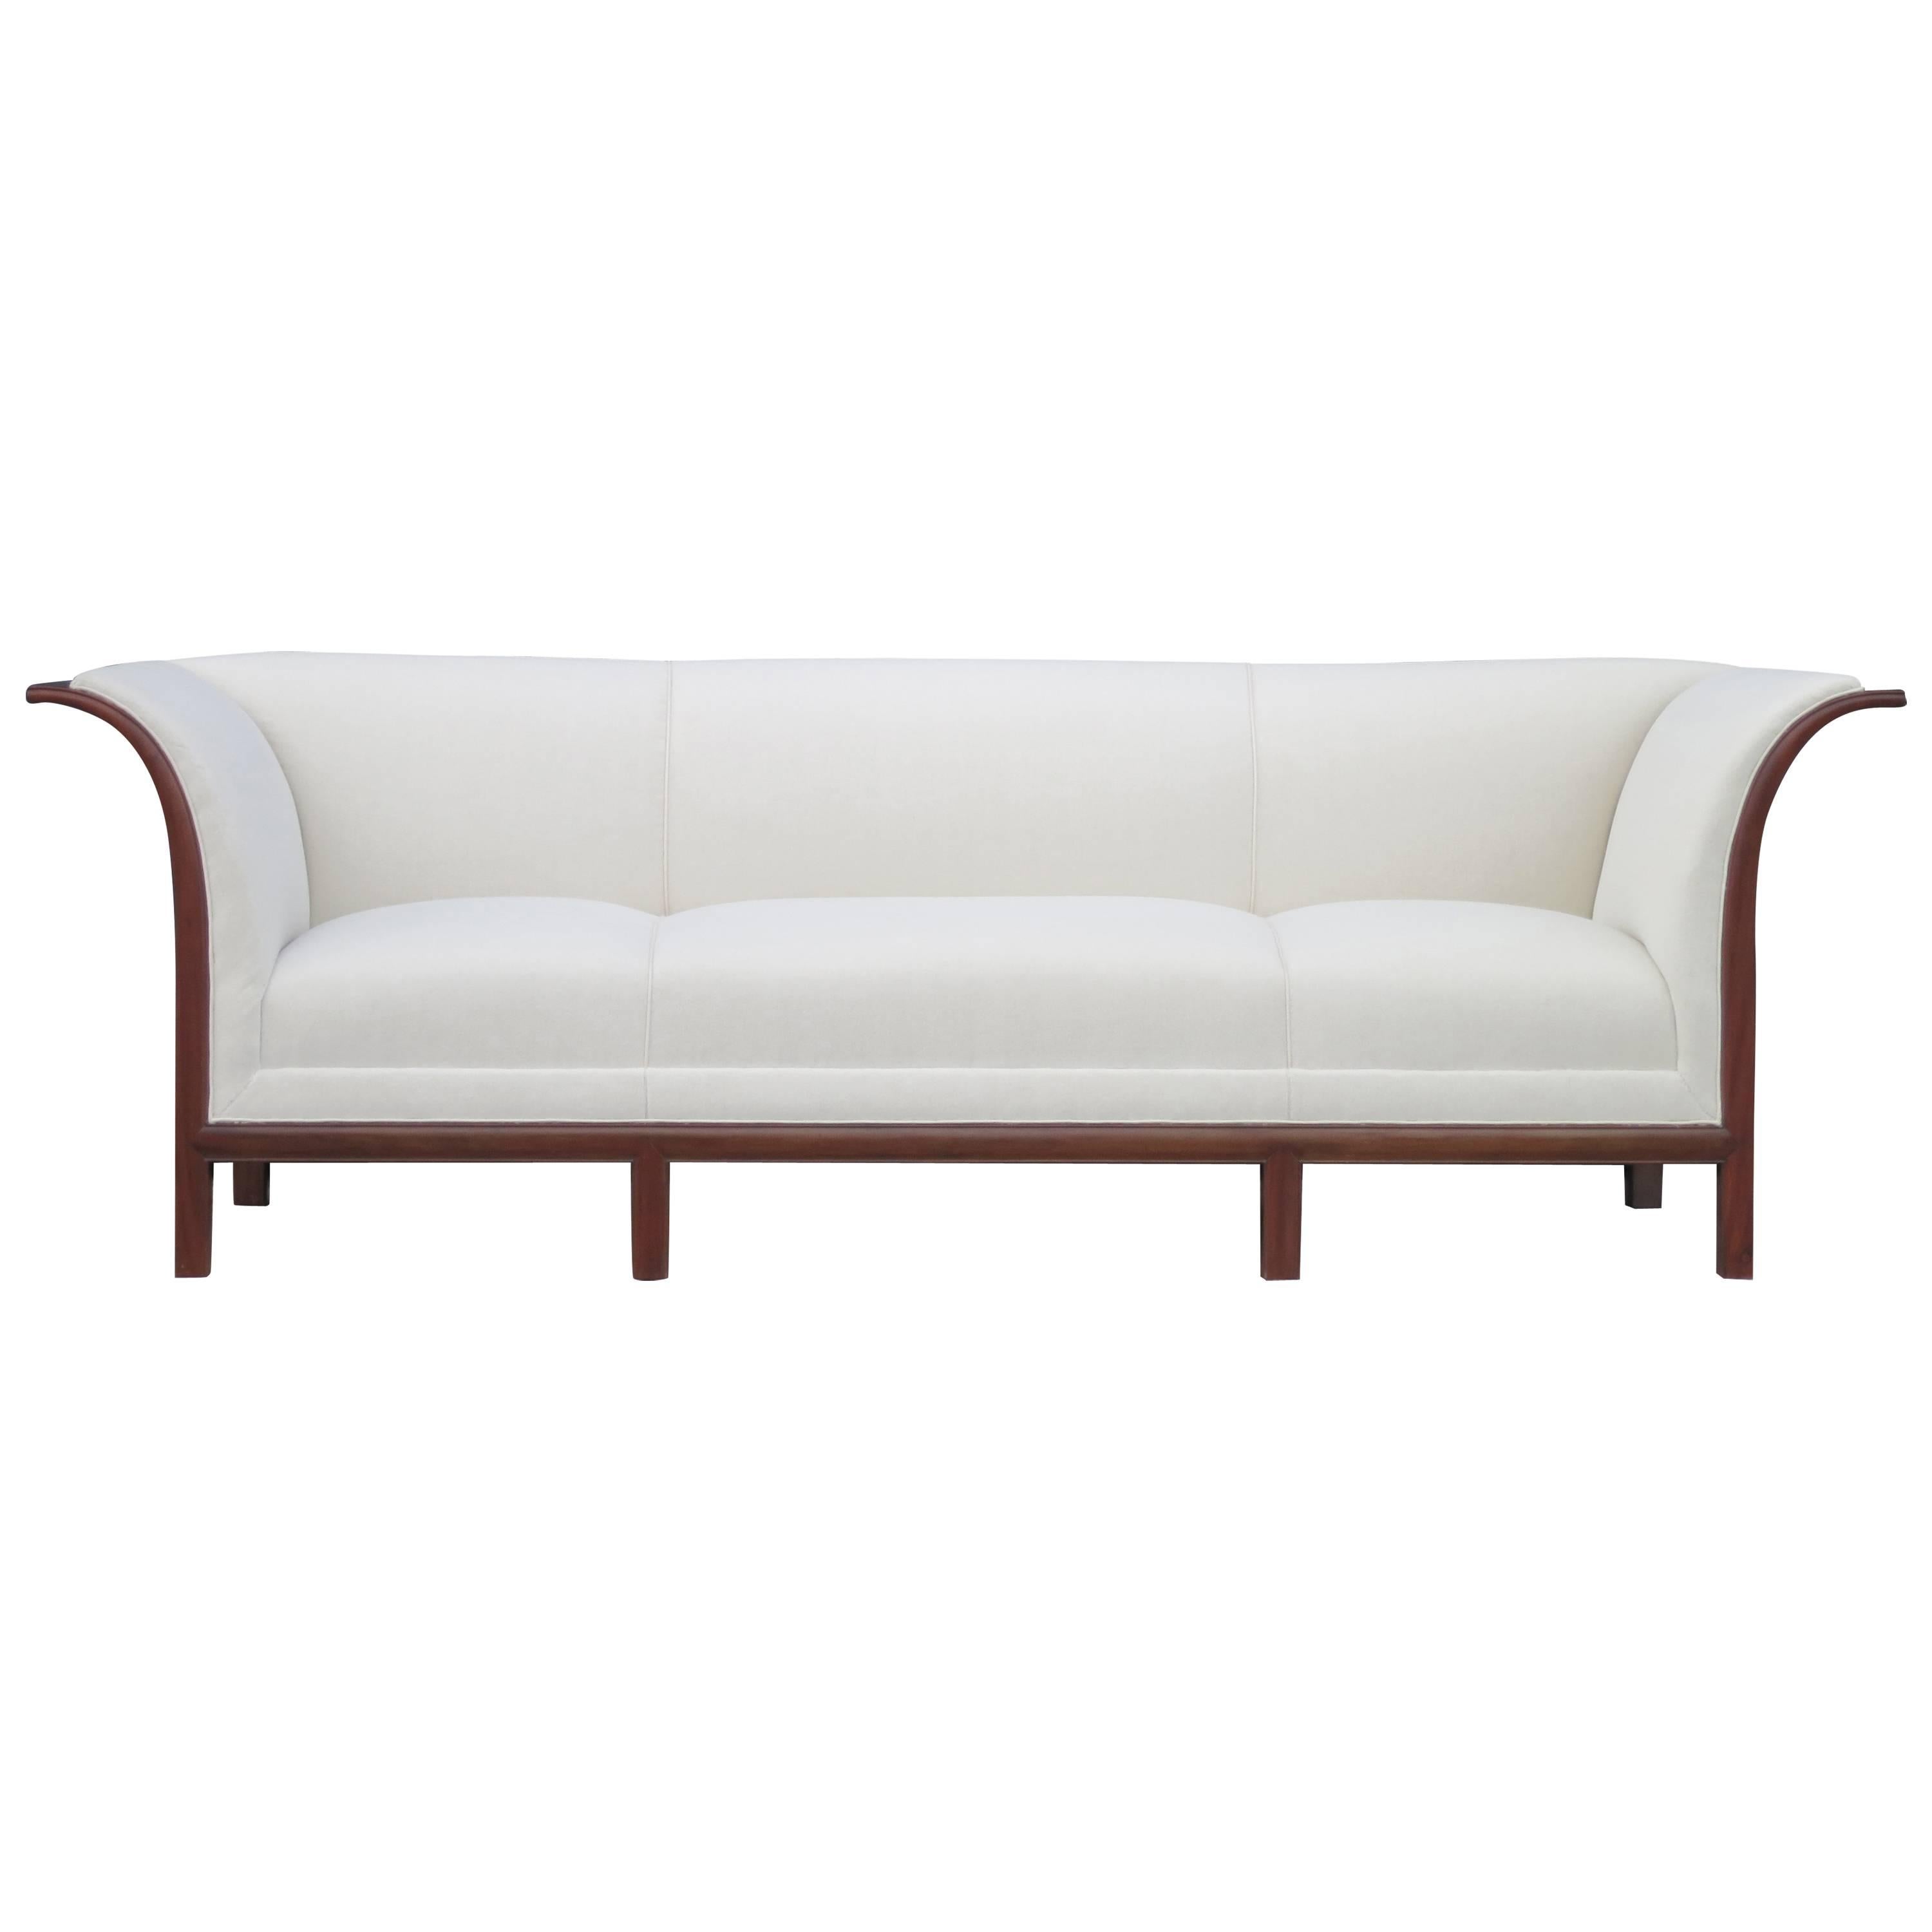 Sofa in Carved Cuban Mahogany and Alpaca Velvet by Frits Henningsen, 1930s  im Angebot